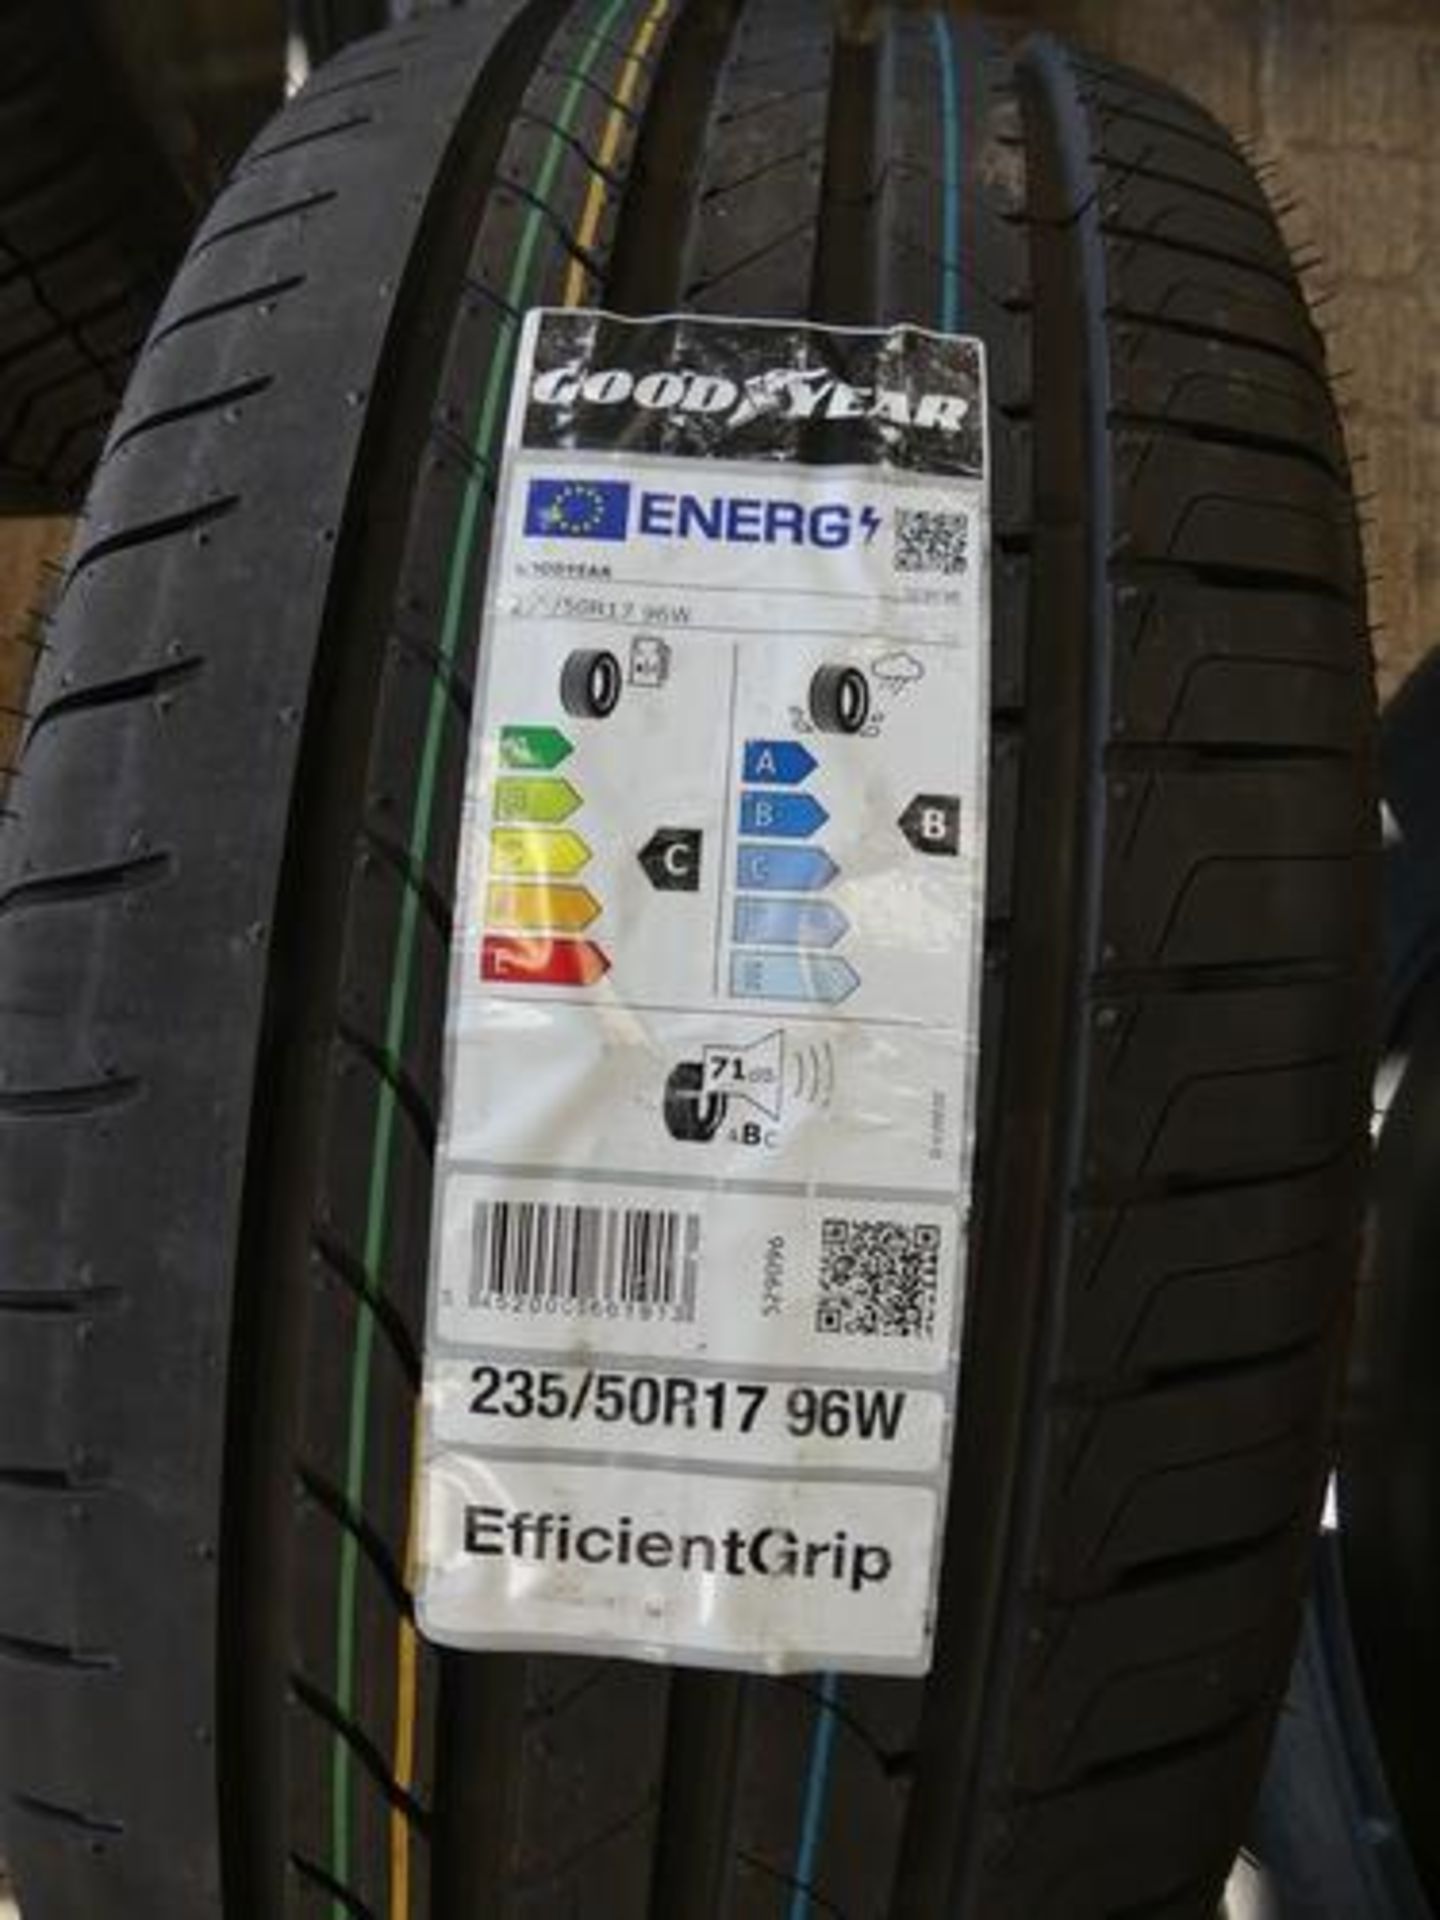 1 x Goodyear Efficient grip tyre, size 235/50R17 96W - New with label (pallet 3)